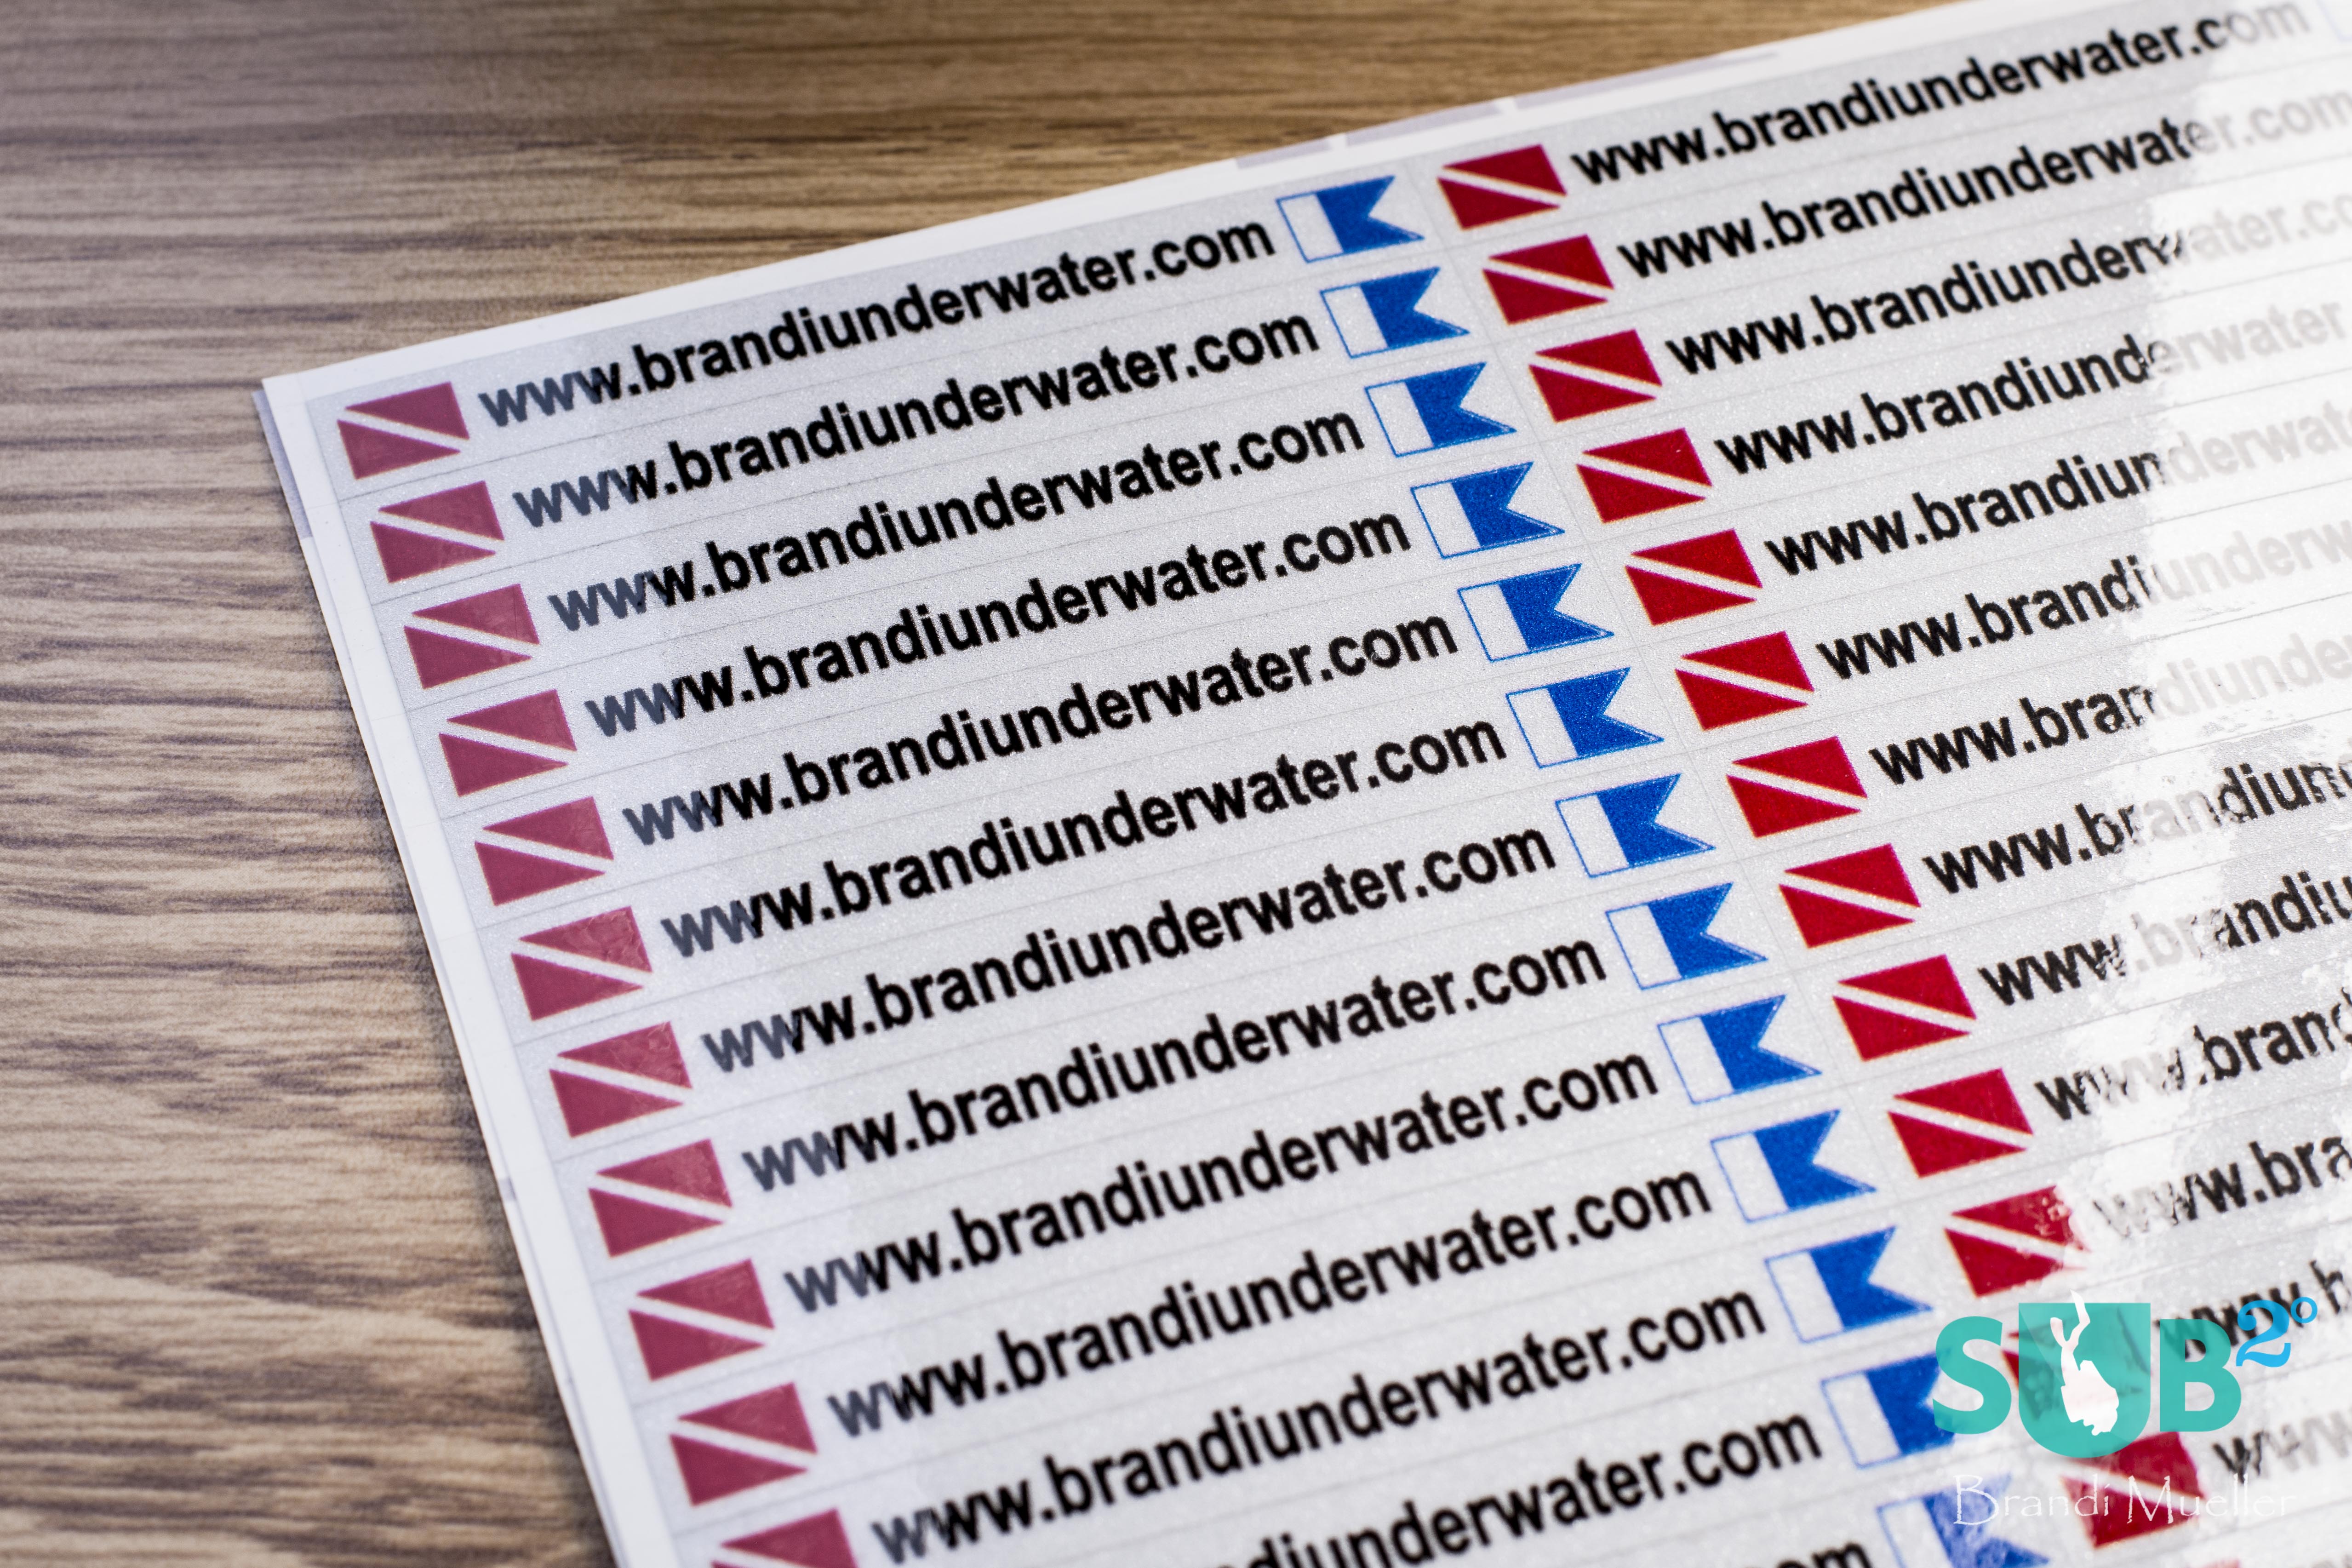 Personalized Waterproof Stickers, like these from Active Images, can help to identify your gear.  On busy dive boats many divers may have the same or similar gear and labels can help identify your own and help lost gear be retunred to you.